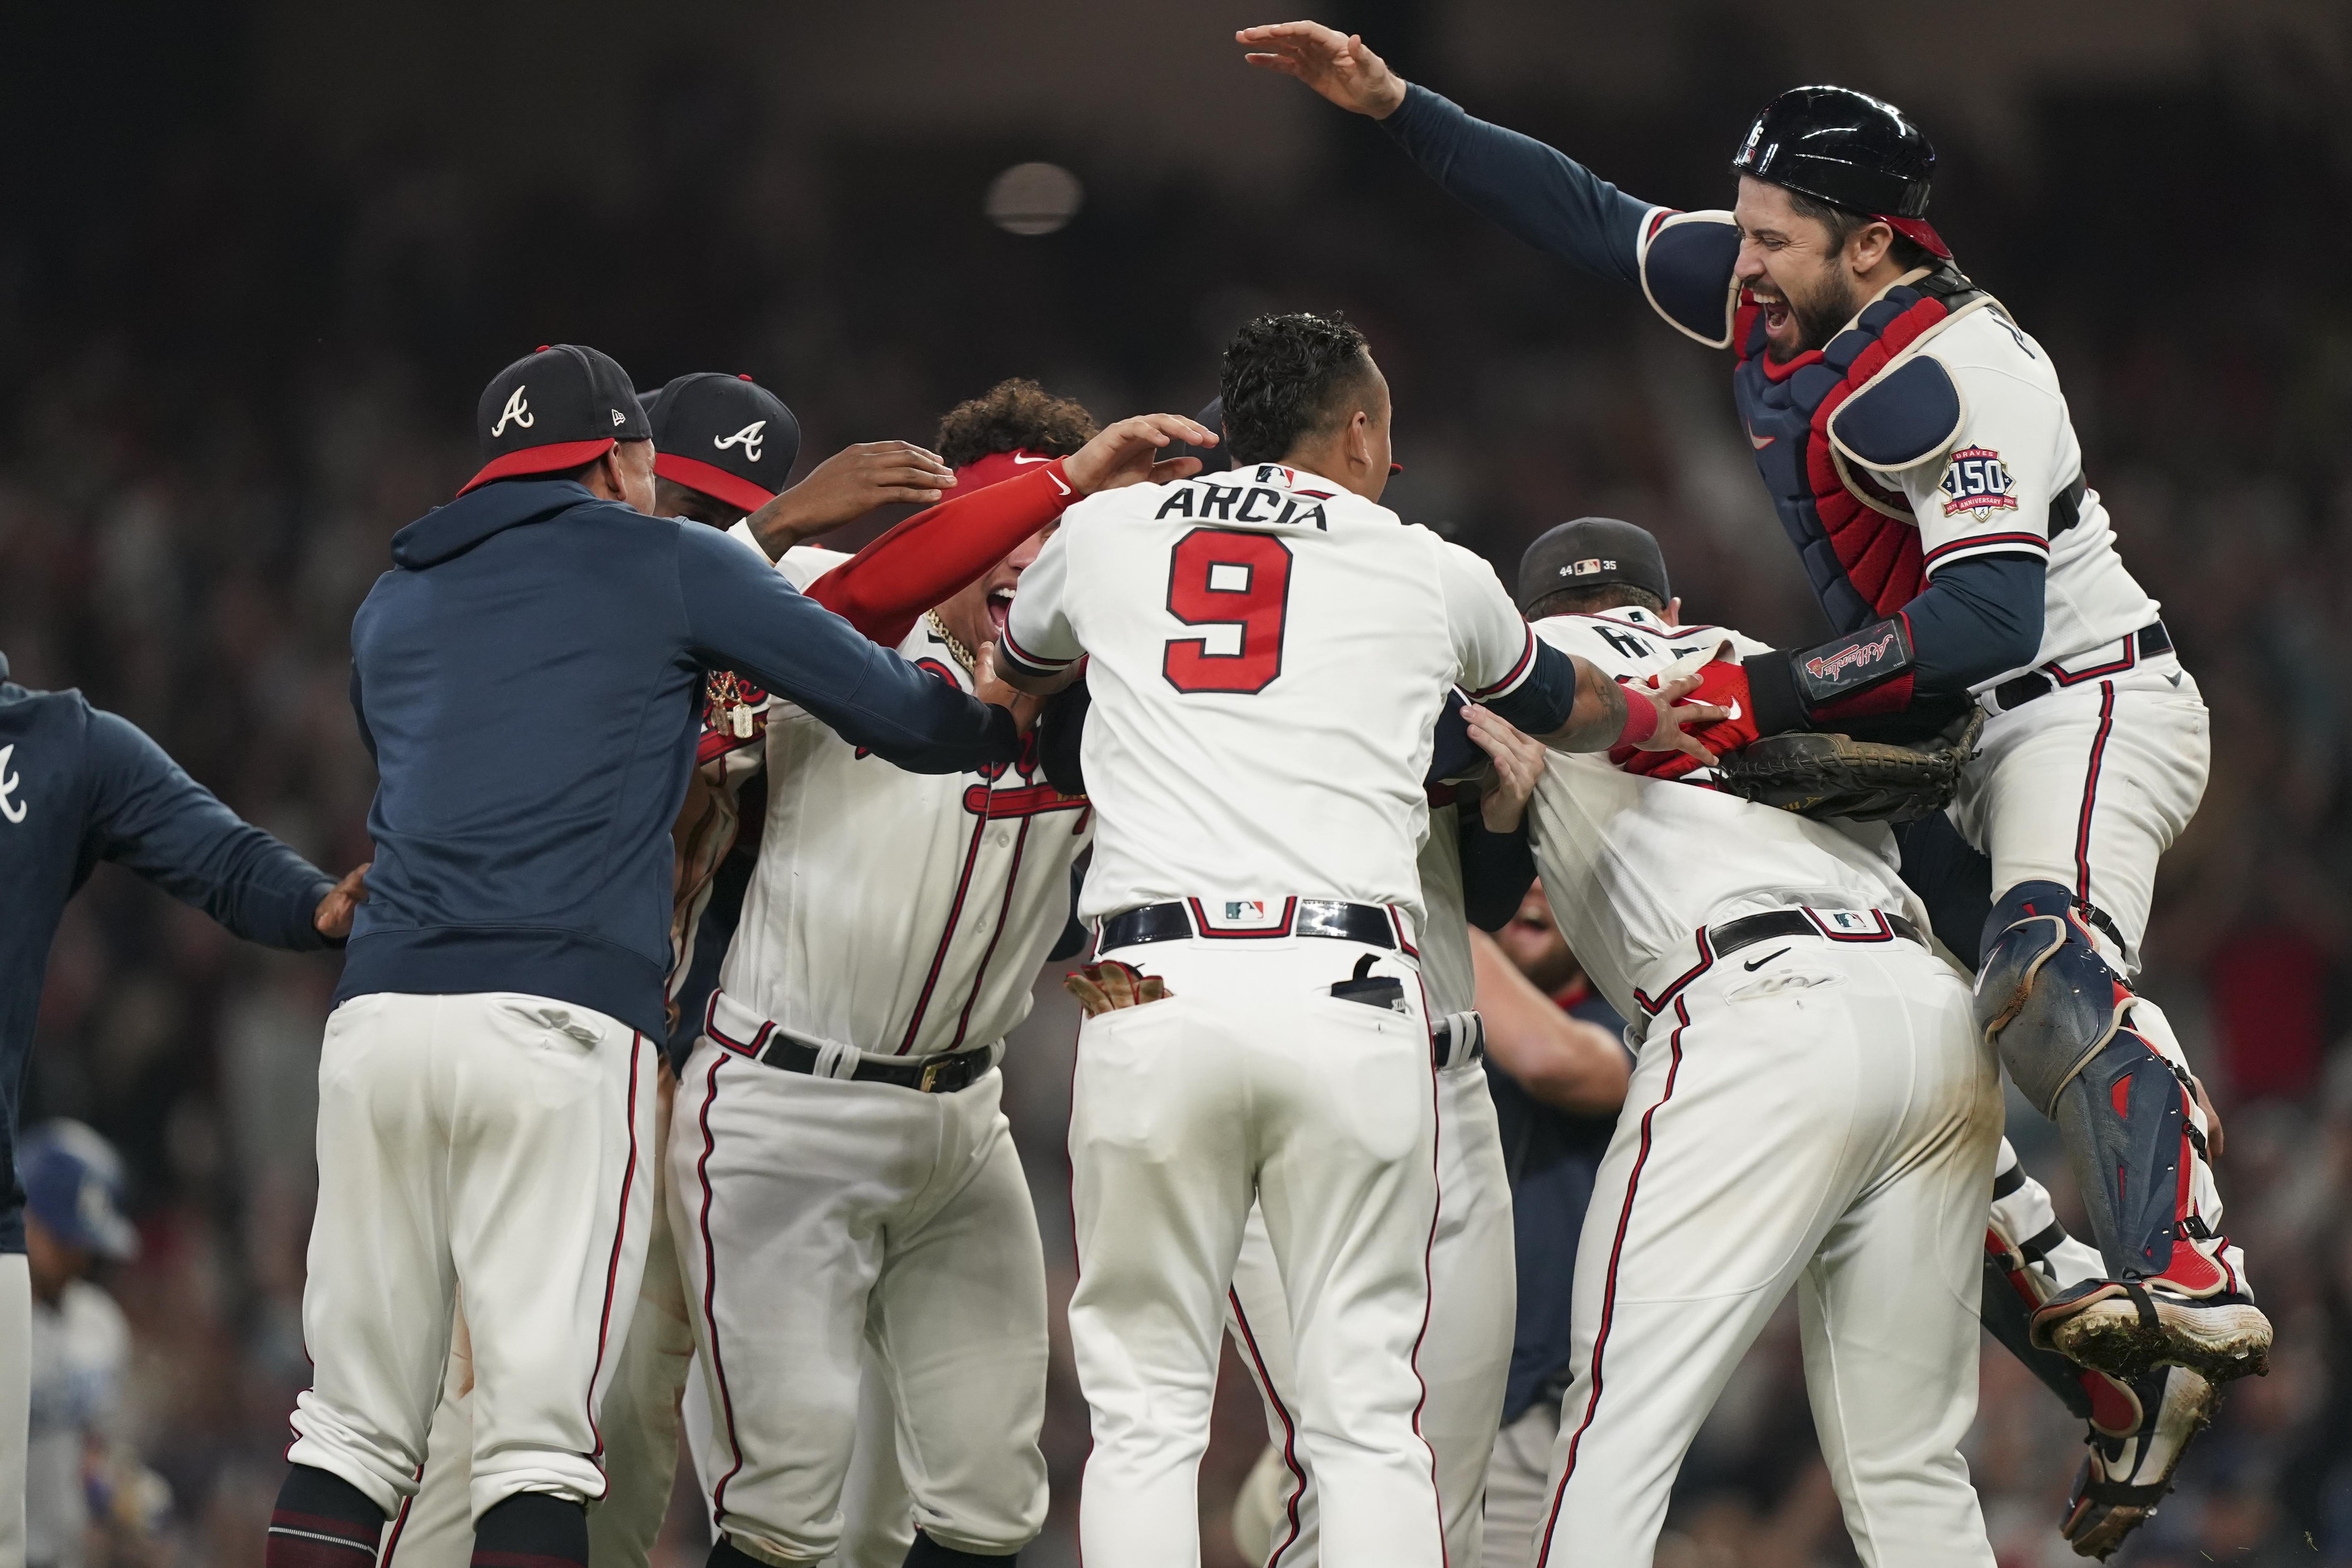 Braves vs Astros: A World Series 6 decades in the making - WHYY